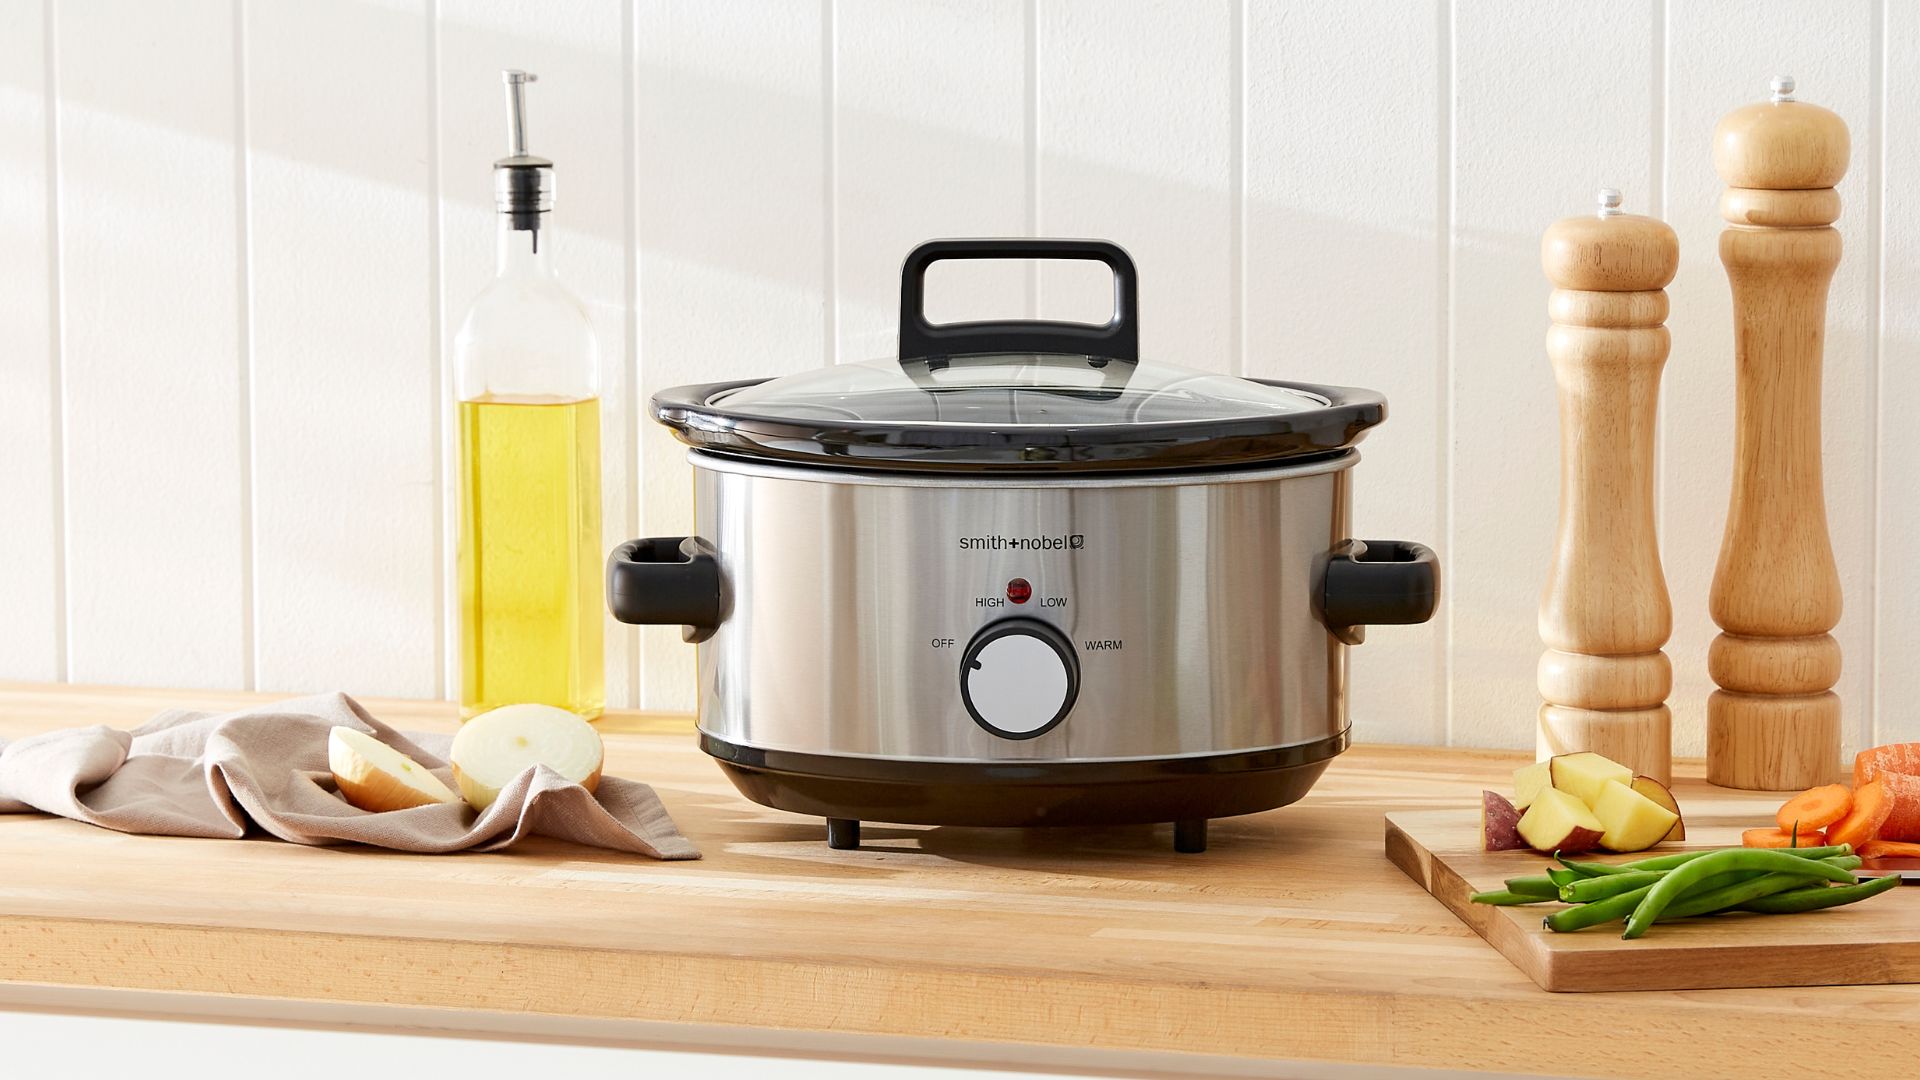 Cook up a hearty meal with the Smith & Nobel Slow Cooker Stainless Steel 3L